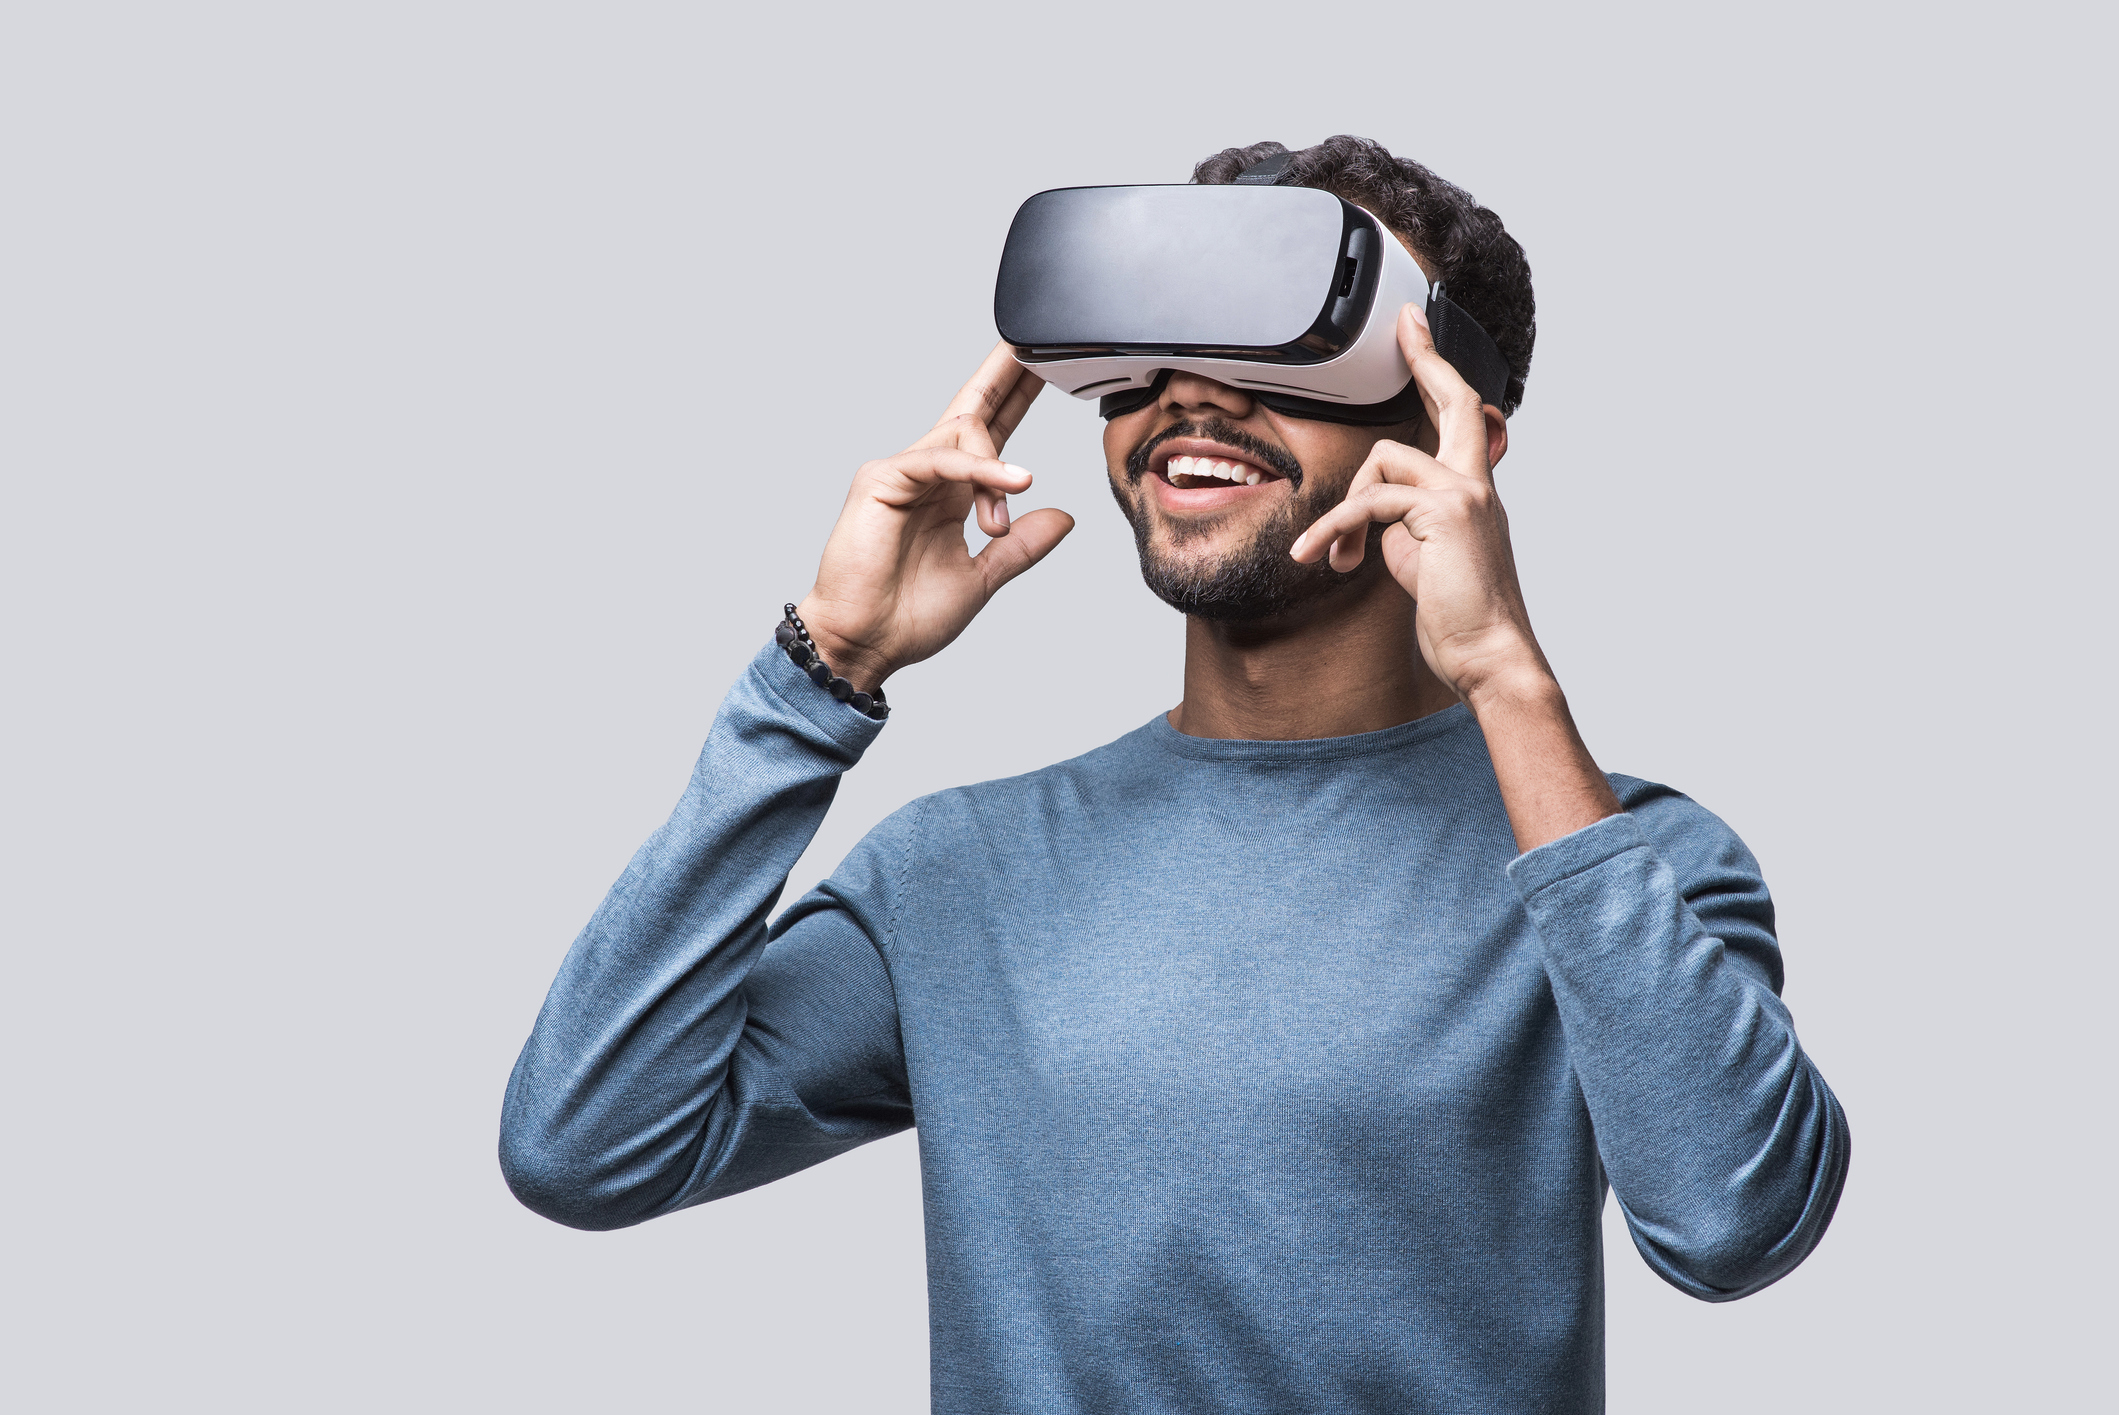 Man wearing a virtual reality headset, appears engaged and smiling, touching the headset